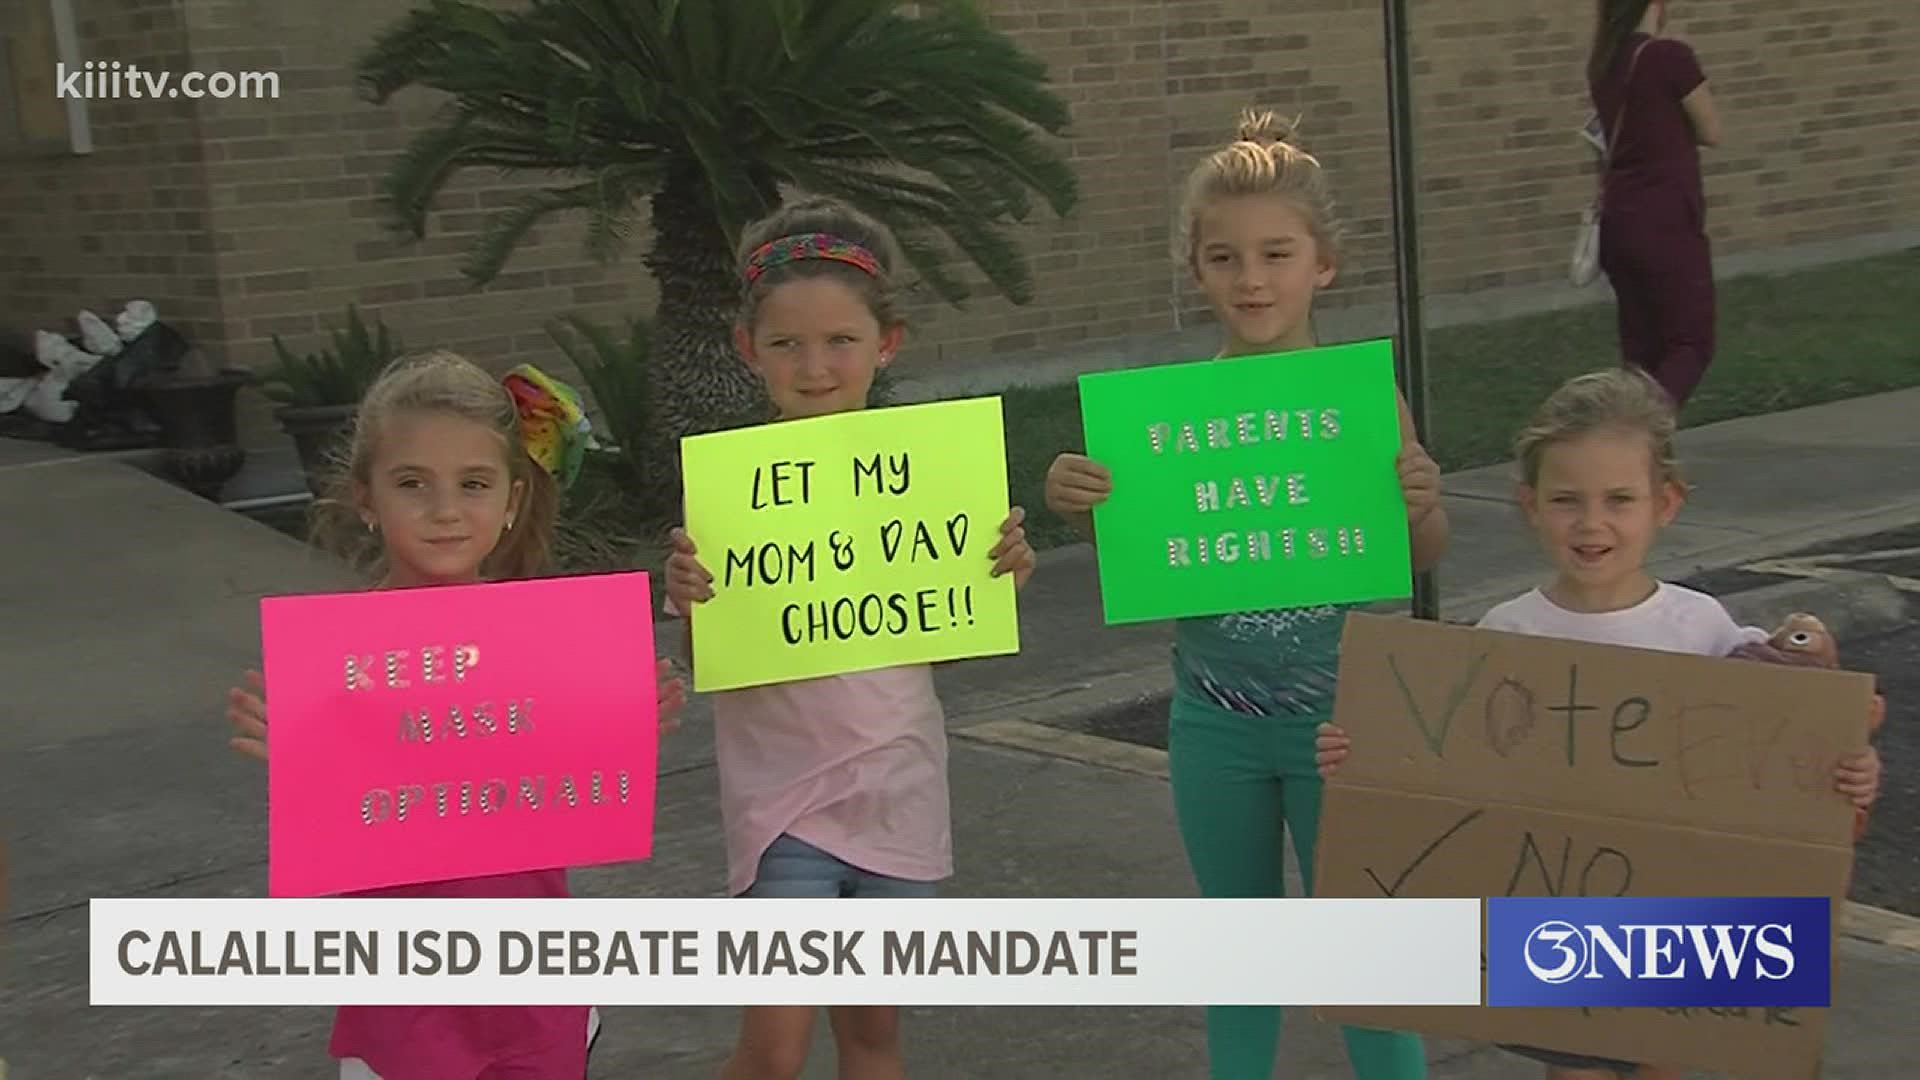 Emotions were high at the Calallen ISD board meeting where discussing a mask mandate was at the top of the agenda.